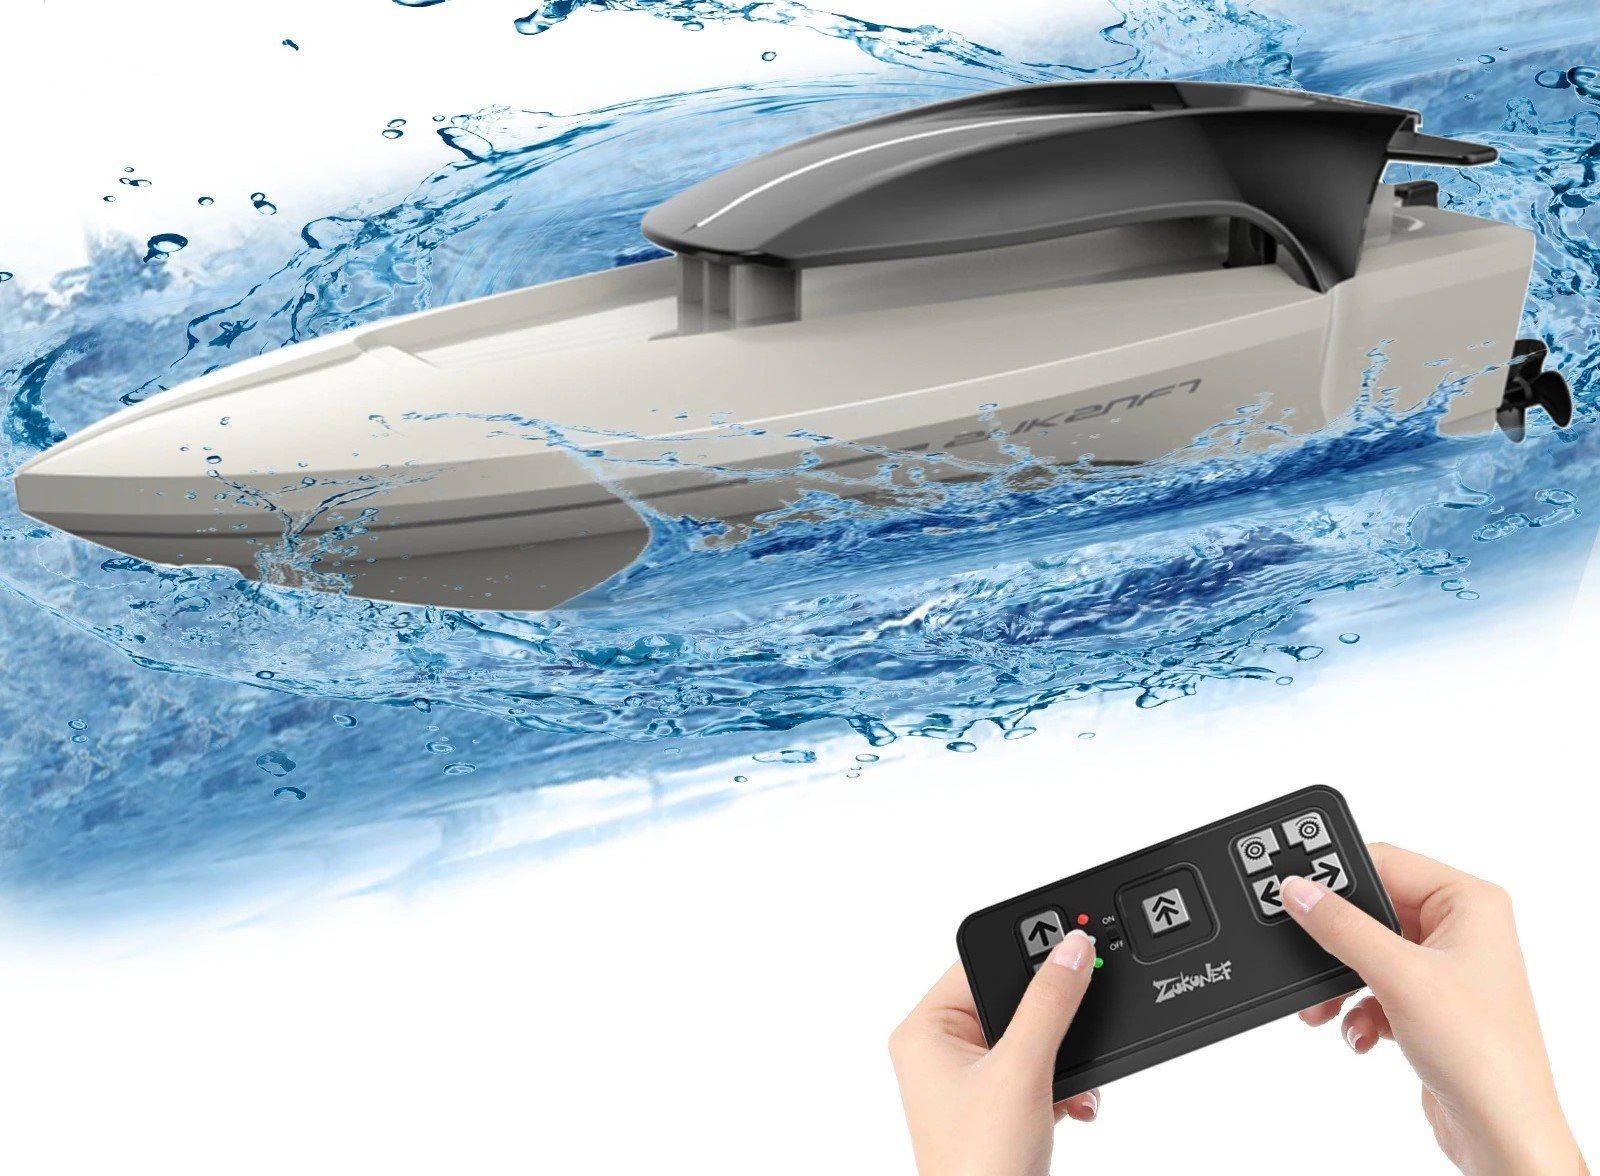 Remote Control Boat With Camera: Effortlessly Capture and Share Footage with Remote Control Boats with Cameras